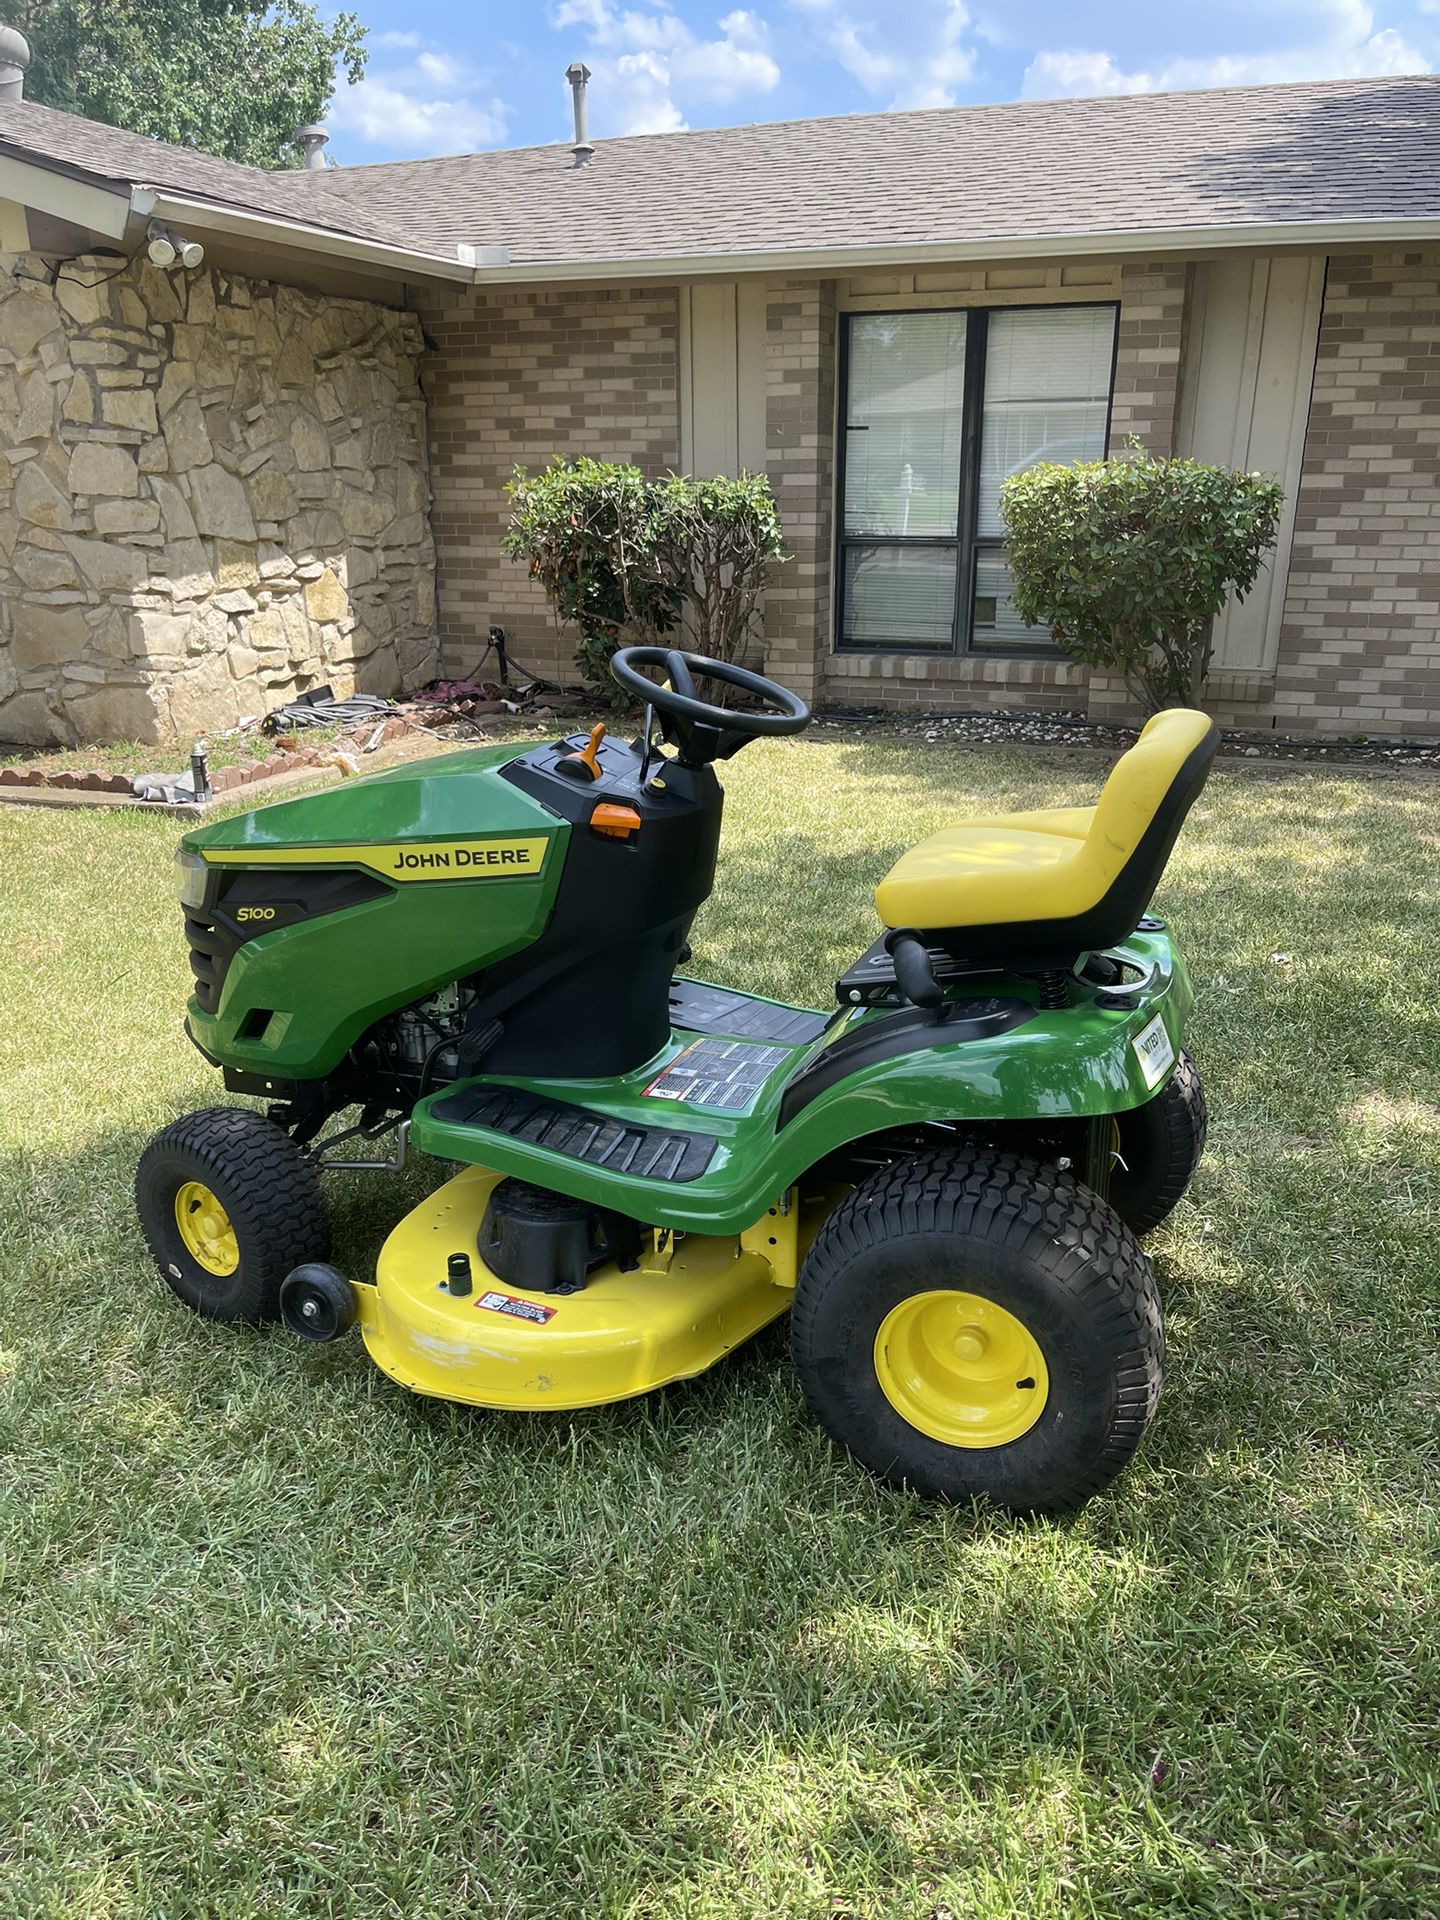 S100 42 in. 17.5 HP Gas Hydrostatic Riding Lawn Tractor 🚜 